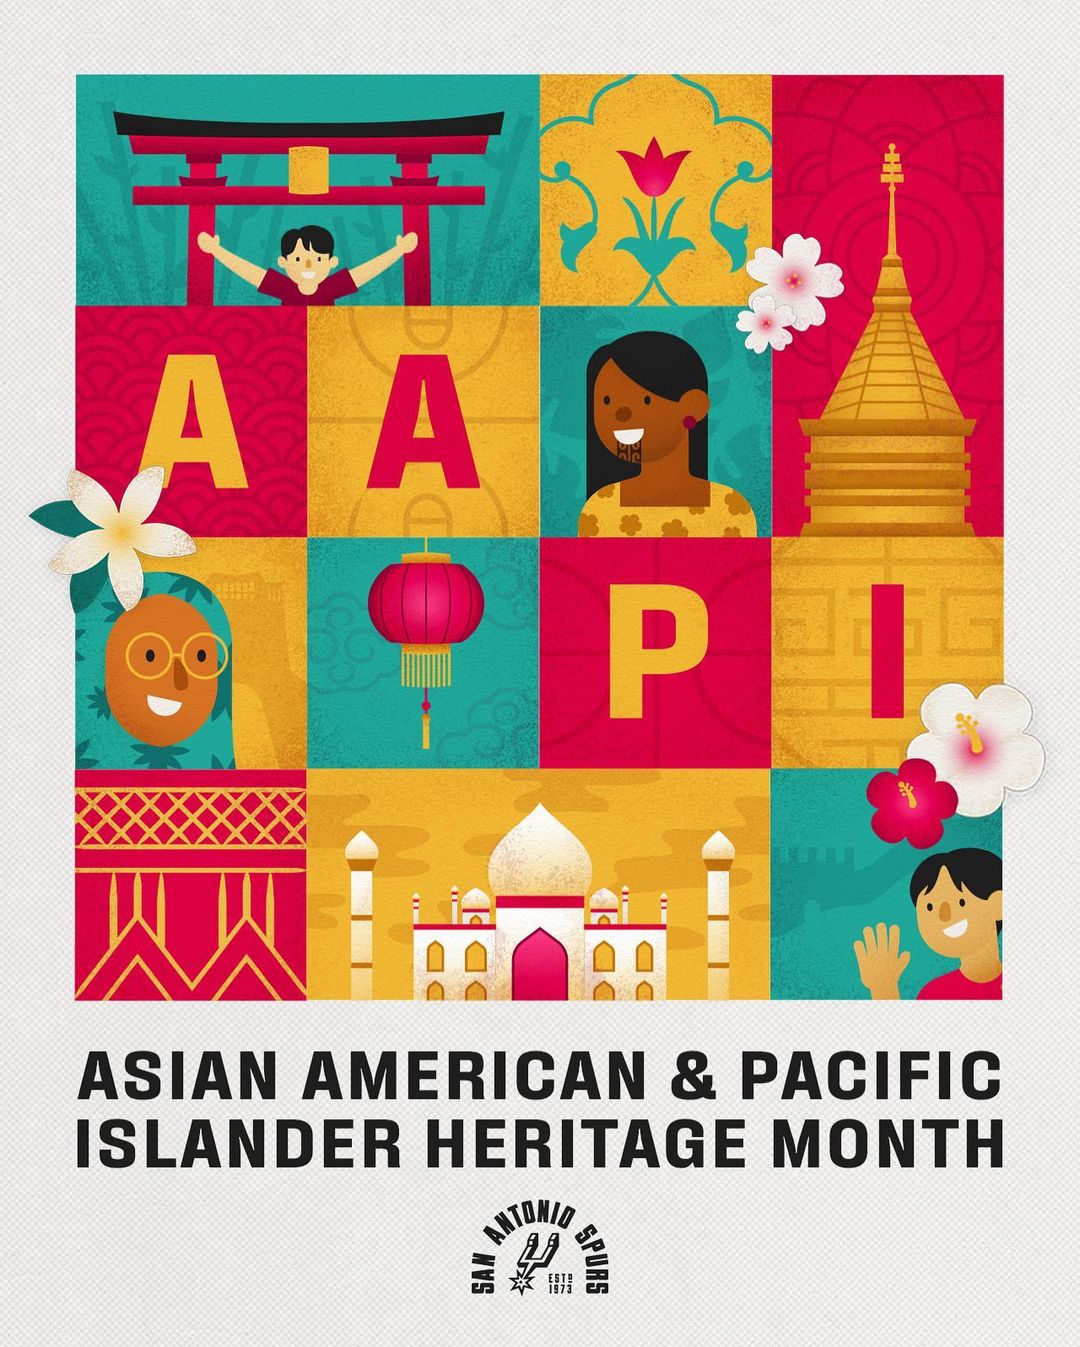 Join us in celebrating Asian American and Pacific Islander culture and history a...